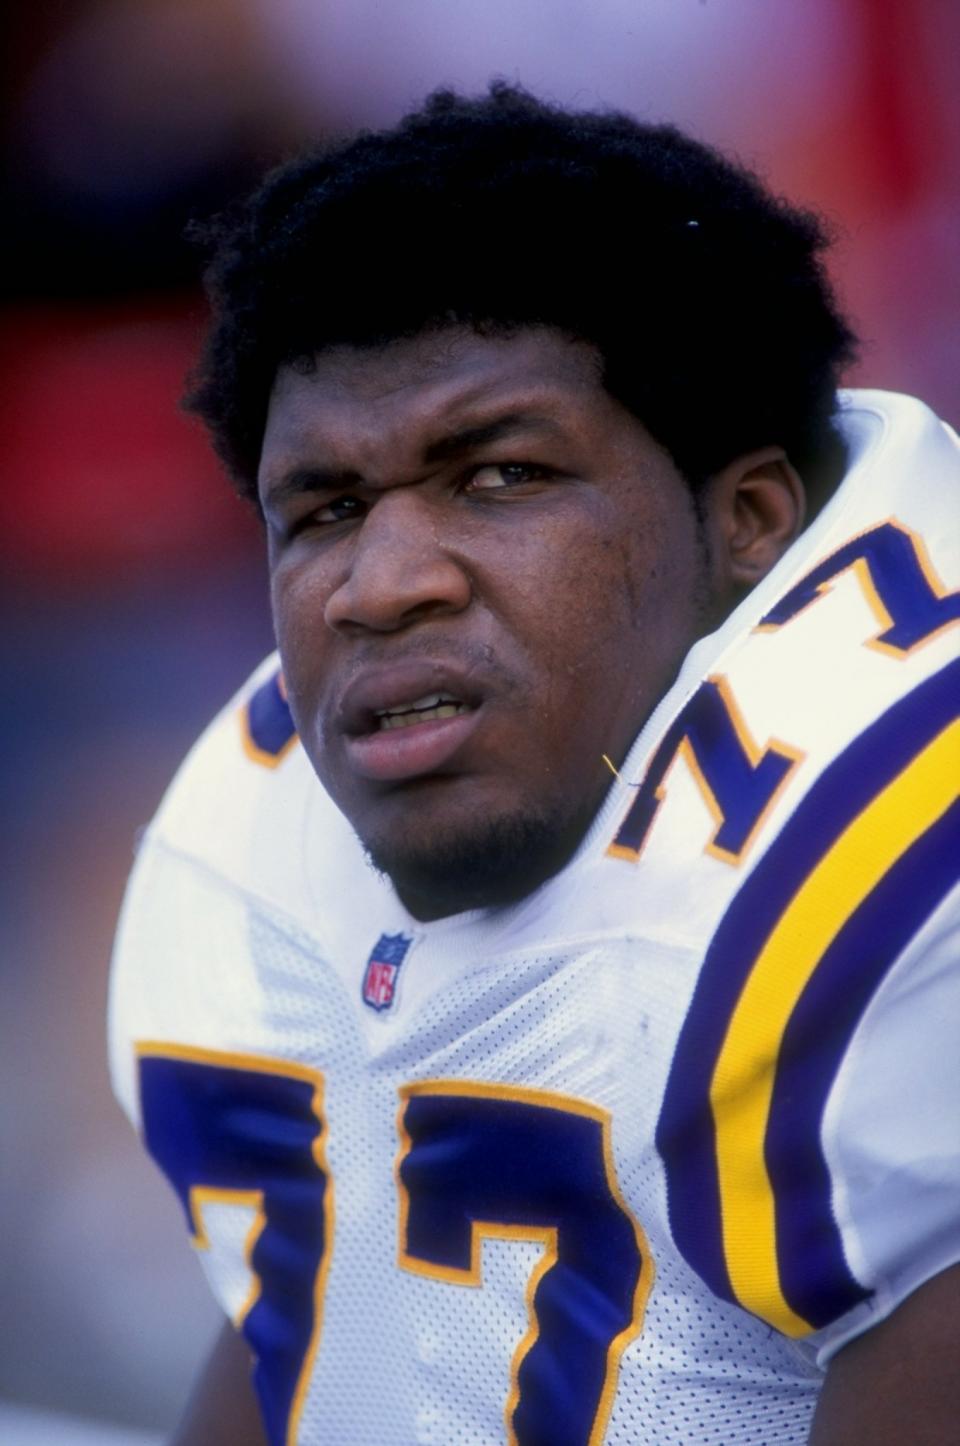 <p>Cause of death: He suffered from heat stroke during the Vikings 2001 preseason training camp, and died as a result of complications. </p>